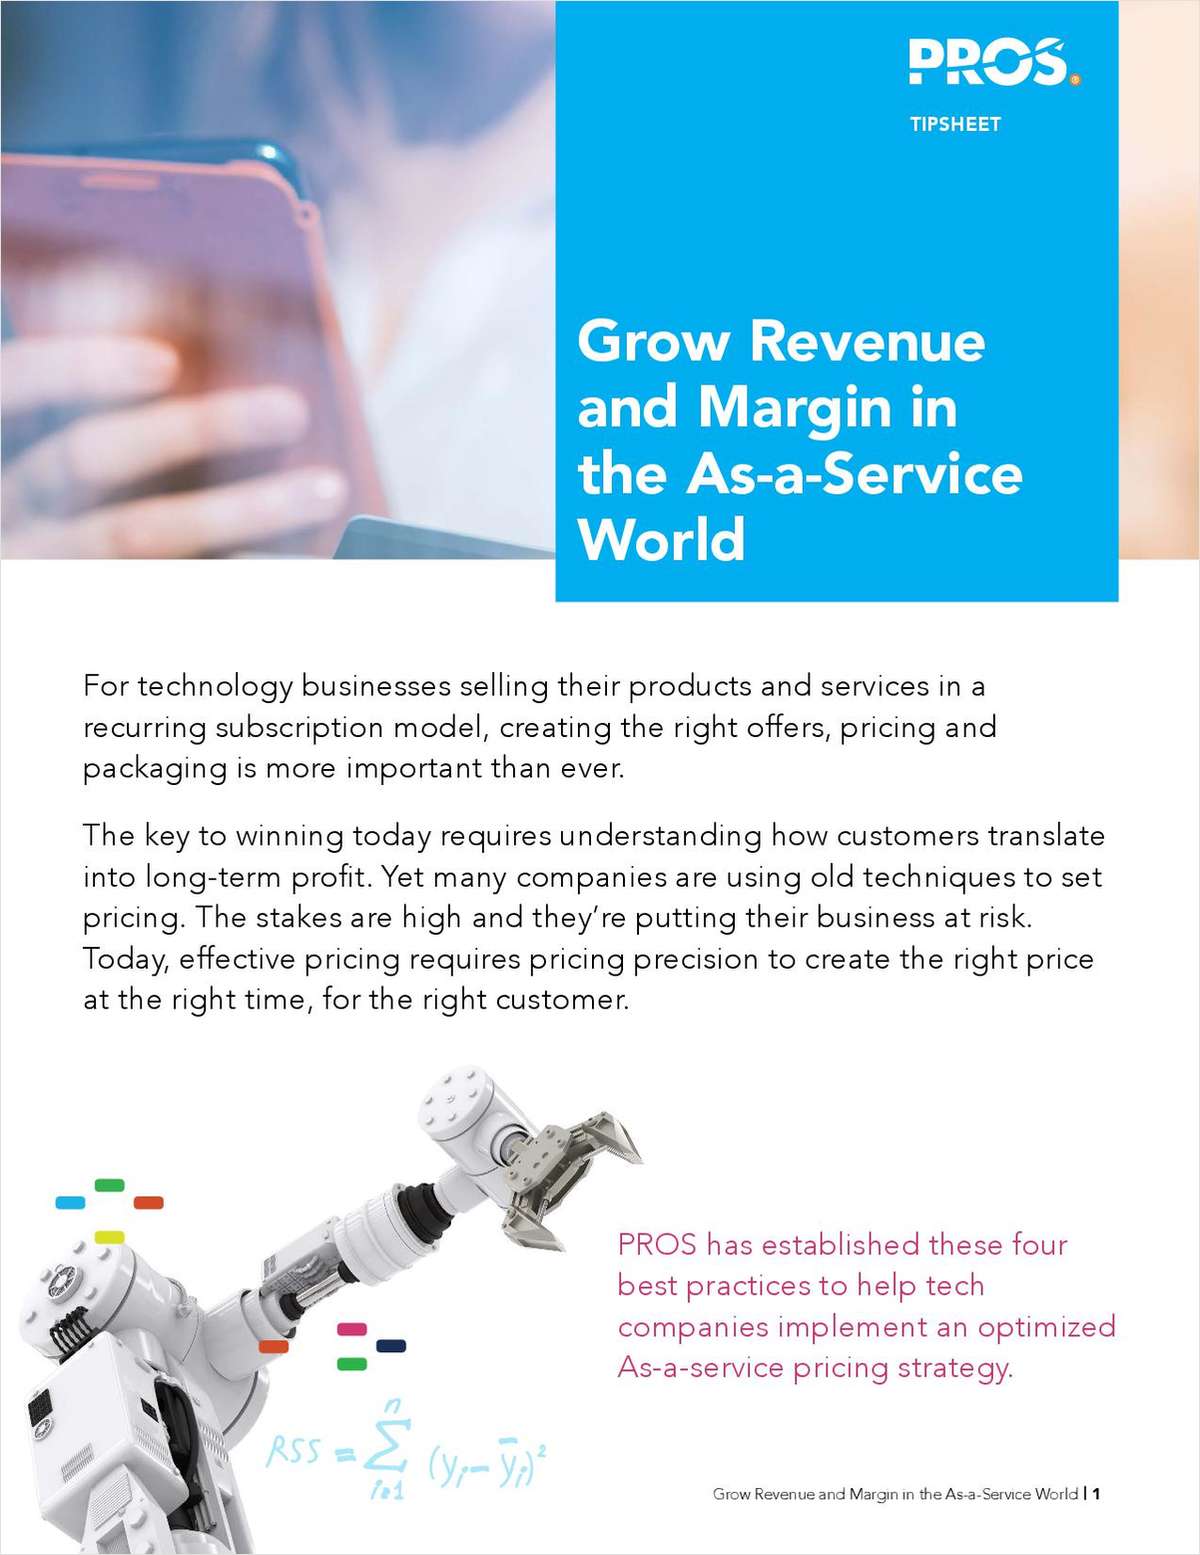 Grow Revenue and Margin in the As-A-Service World